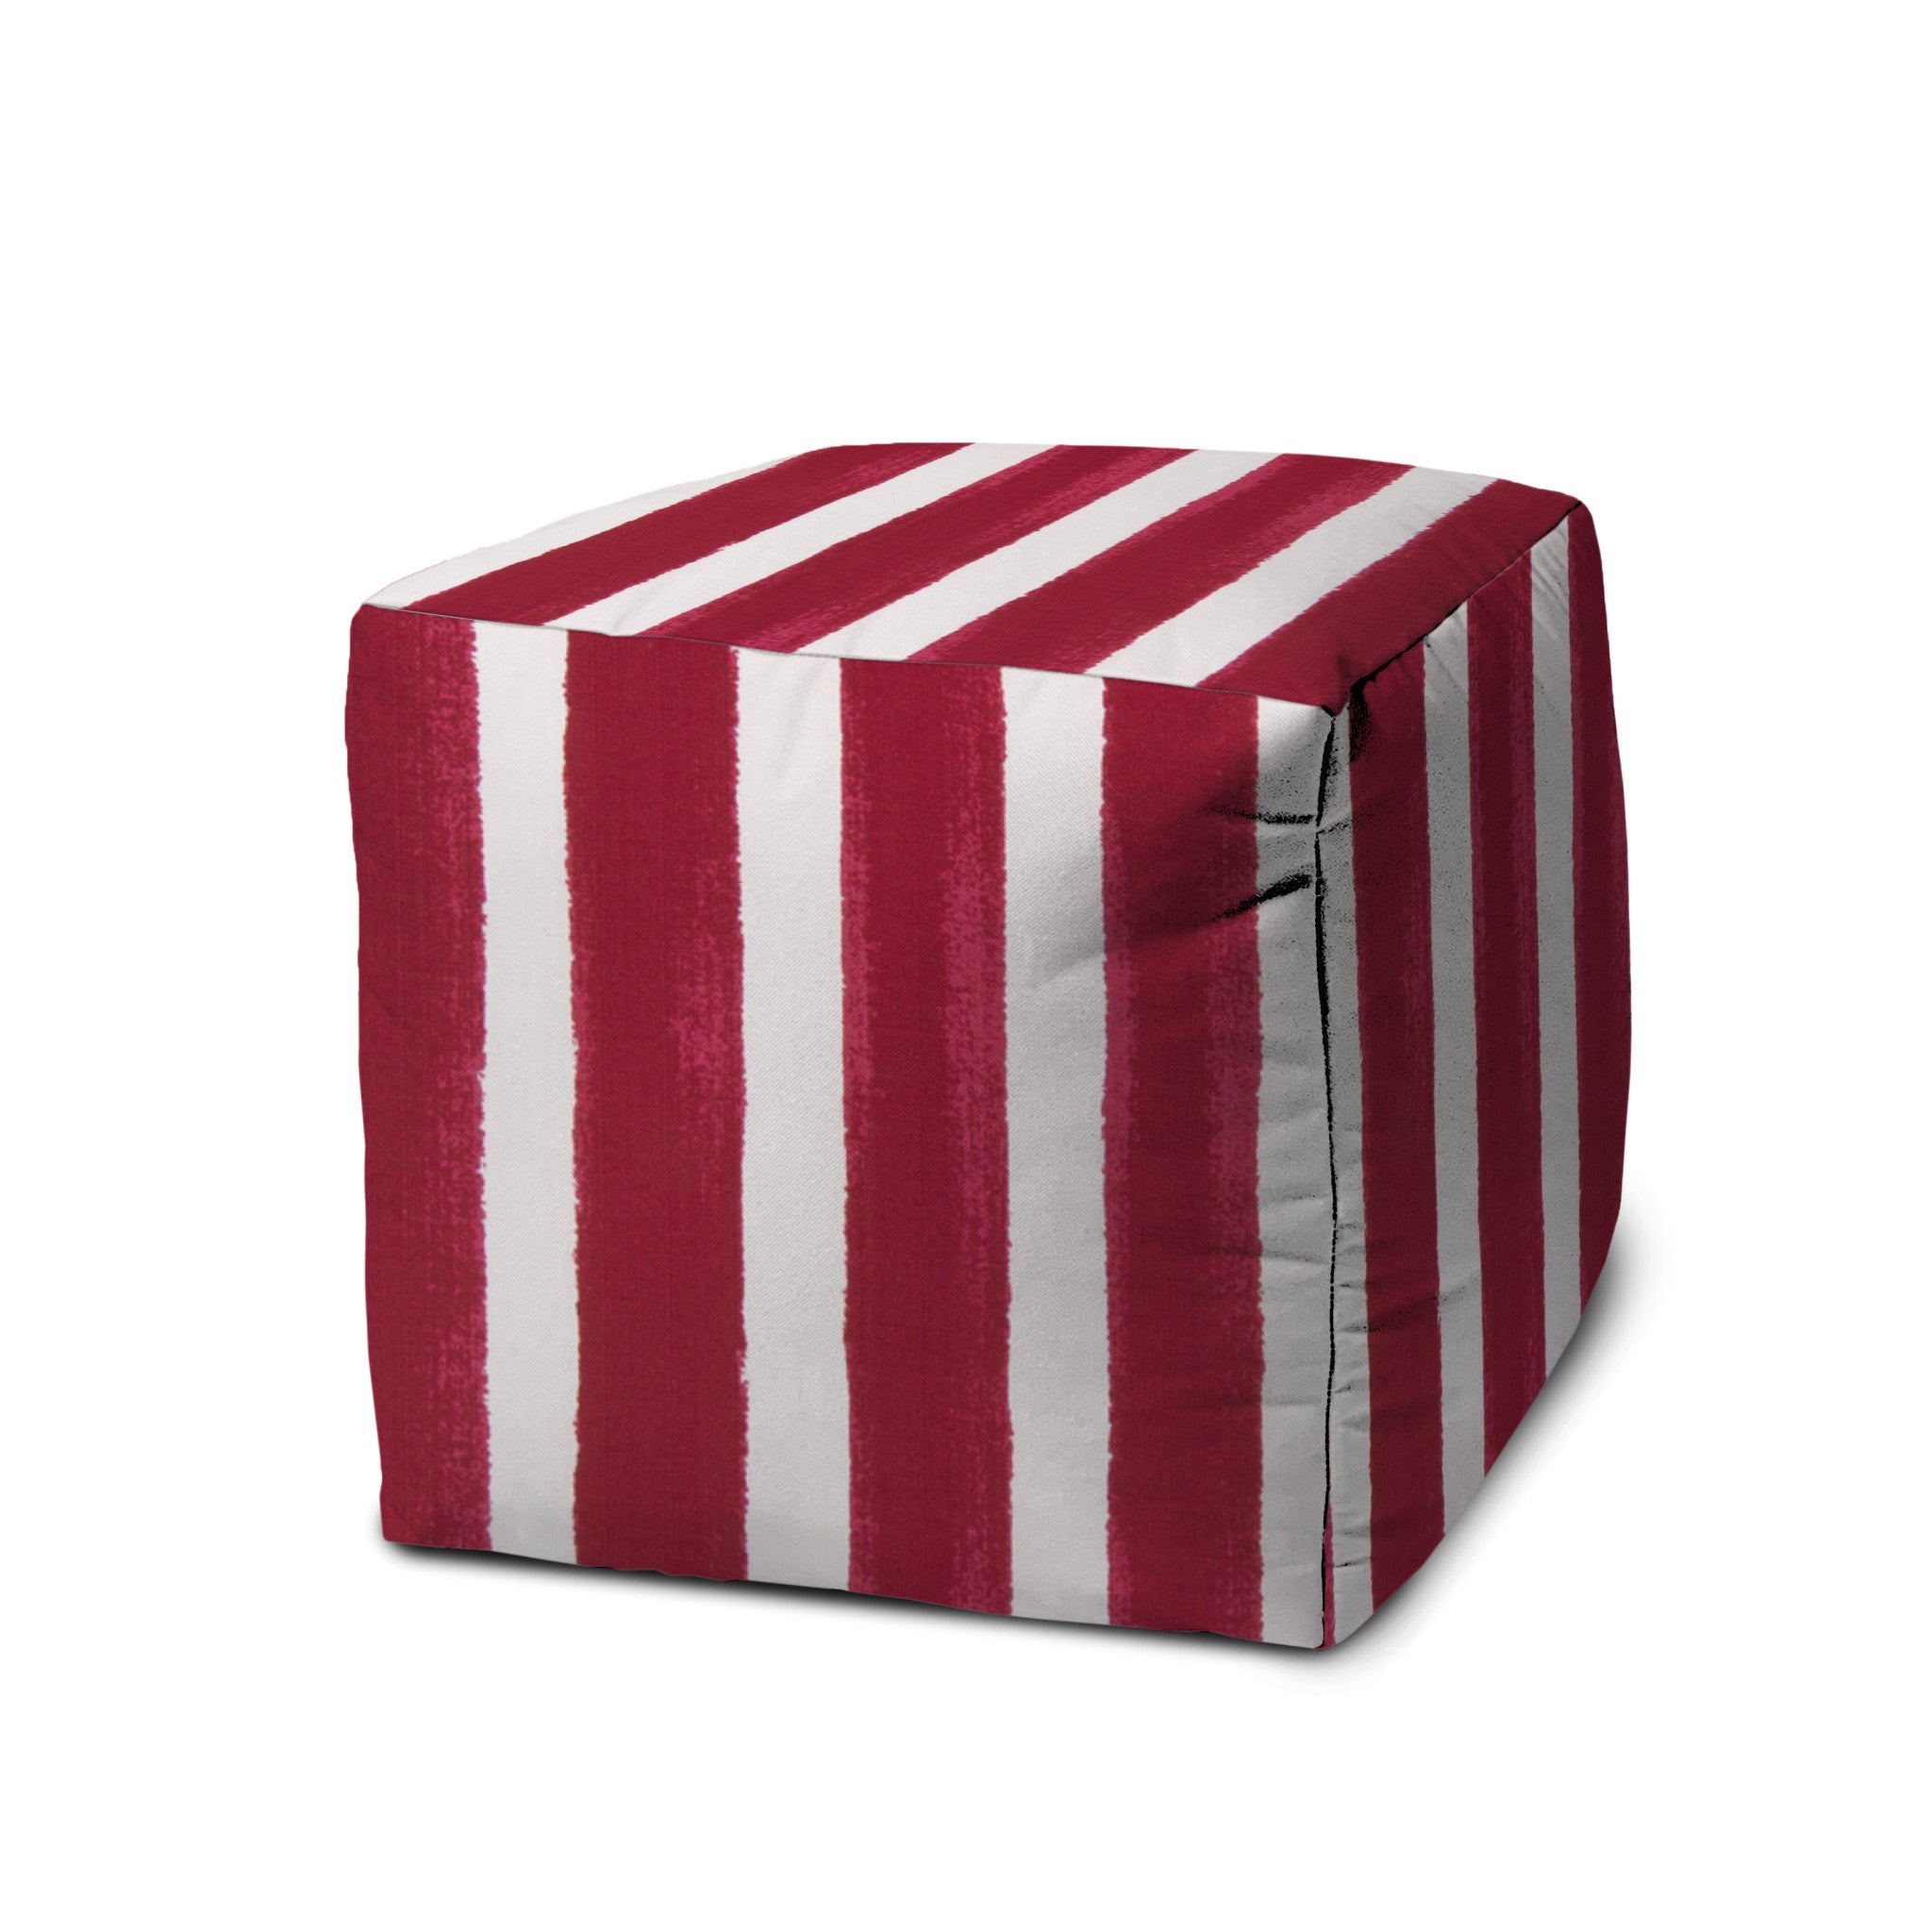 17" Red And White Polyester Cube Striped Indoor Outdoor Pouf Ottoman